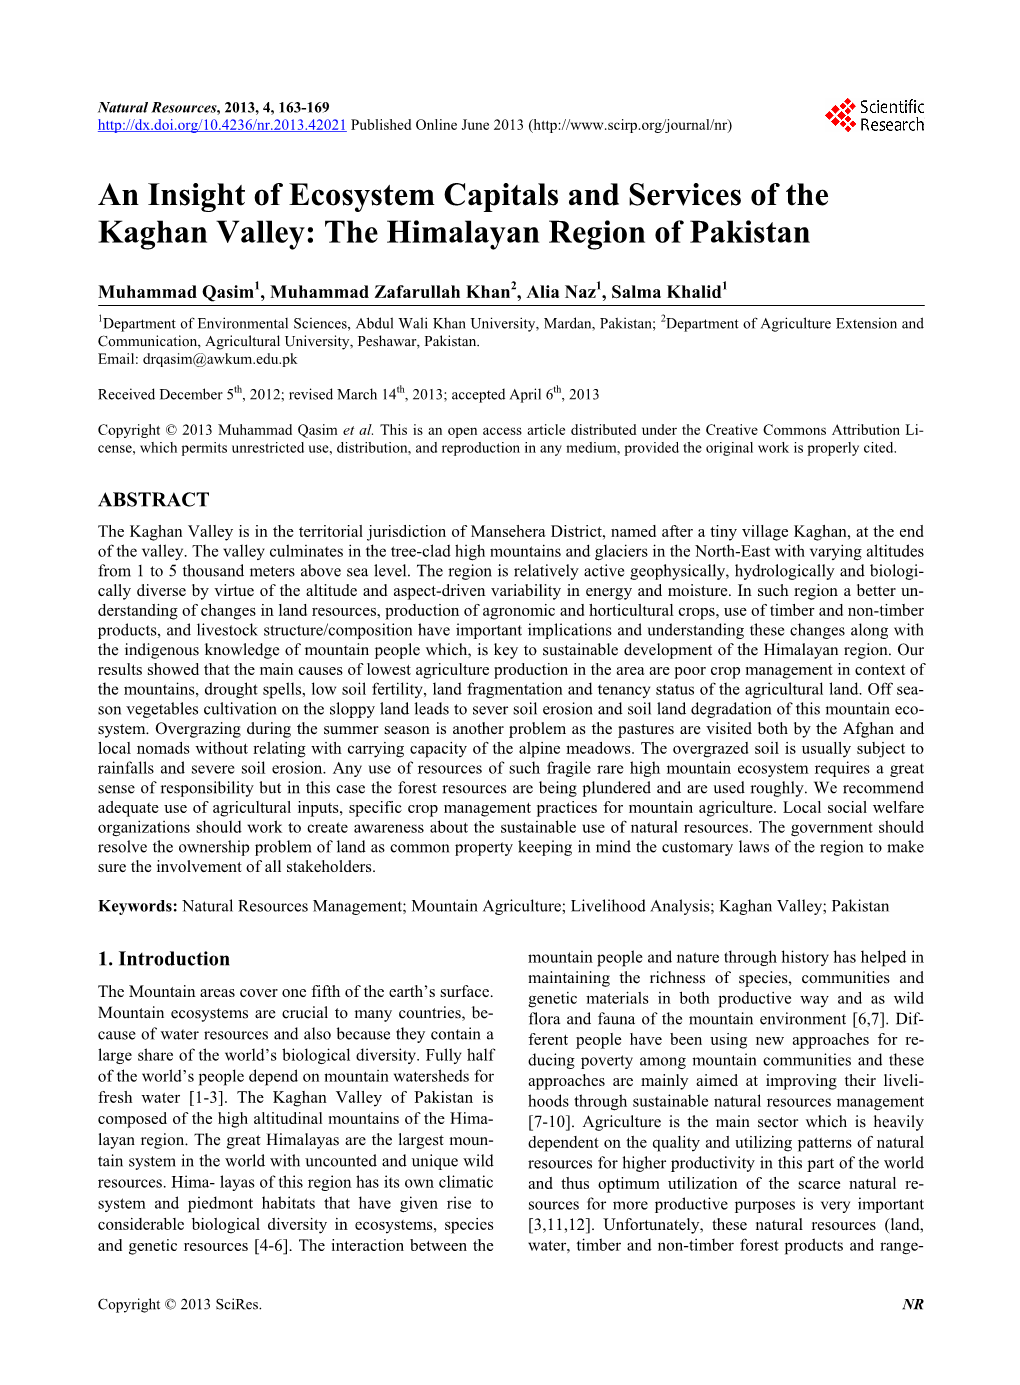 An Insight of Ecosystem Capitals and Services of the Kaghan Valley: the Himalayan Region of Pakistan